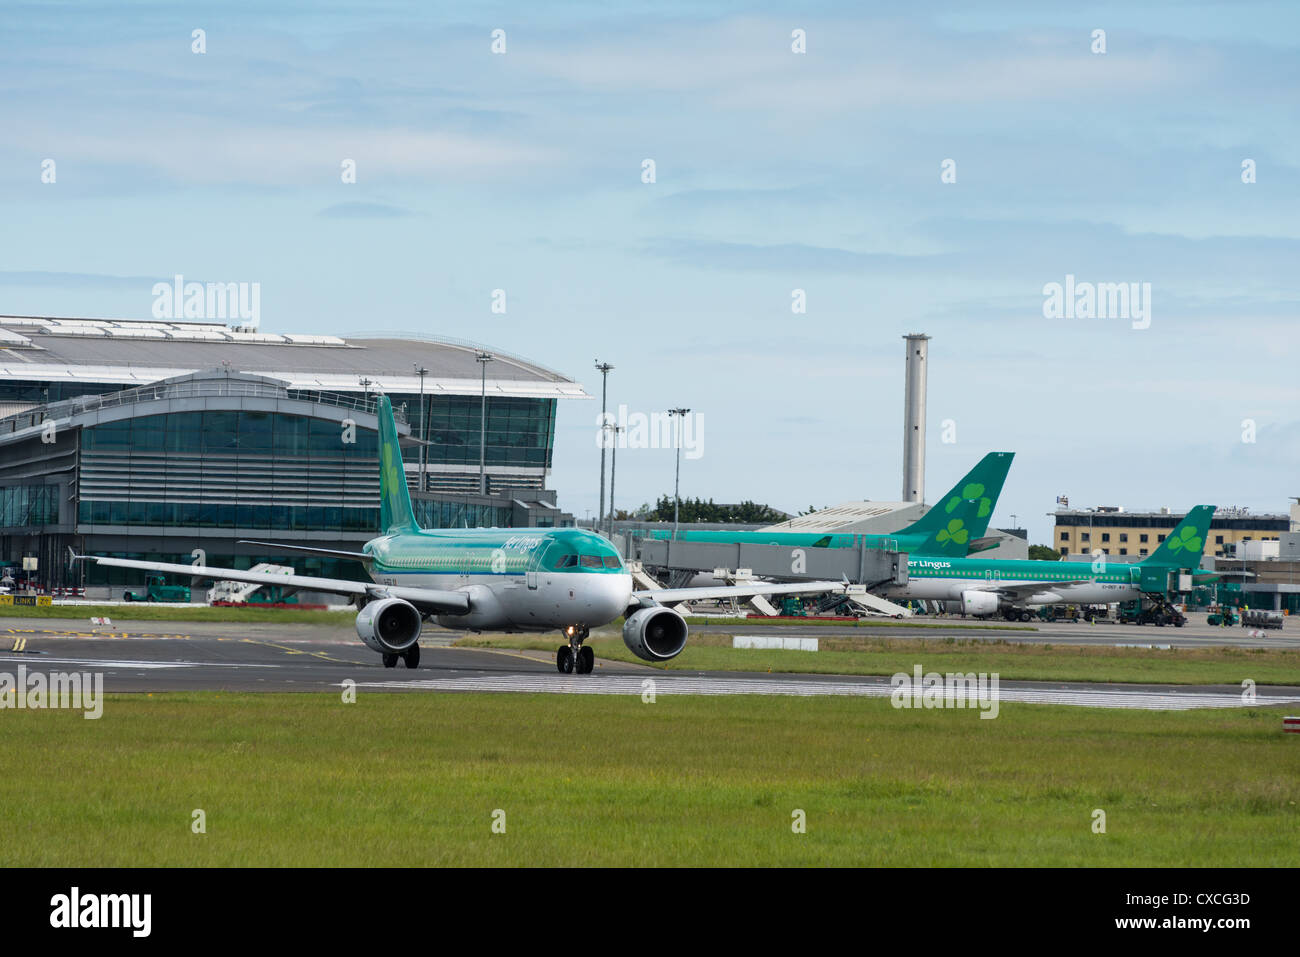 The new Terminal 2 (T2) at Dublin Airport with Aer Lingus aircraft docked outside. Stock Photo